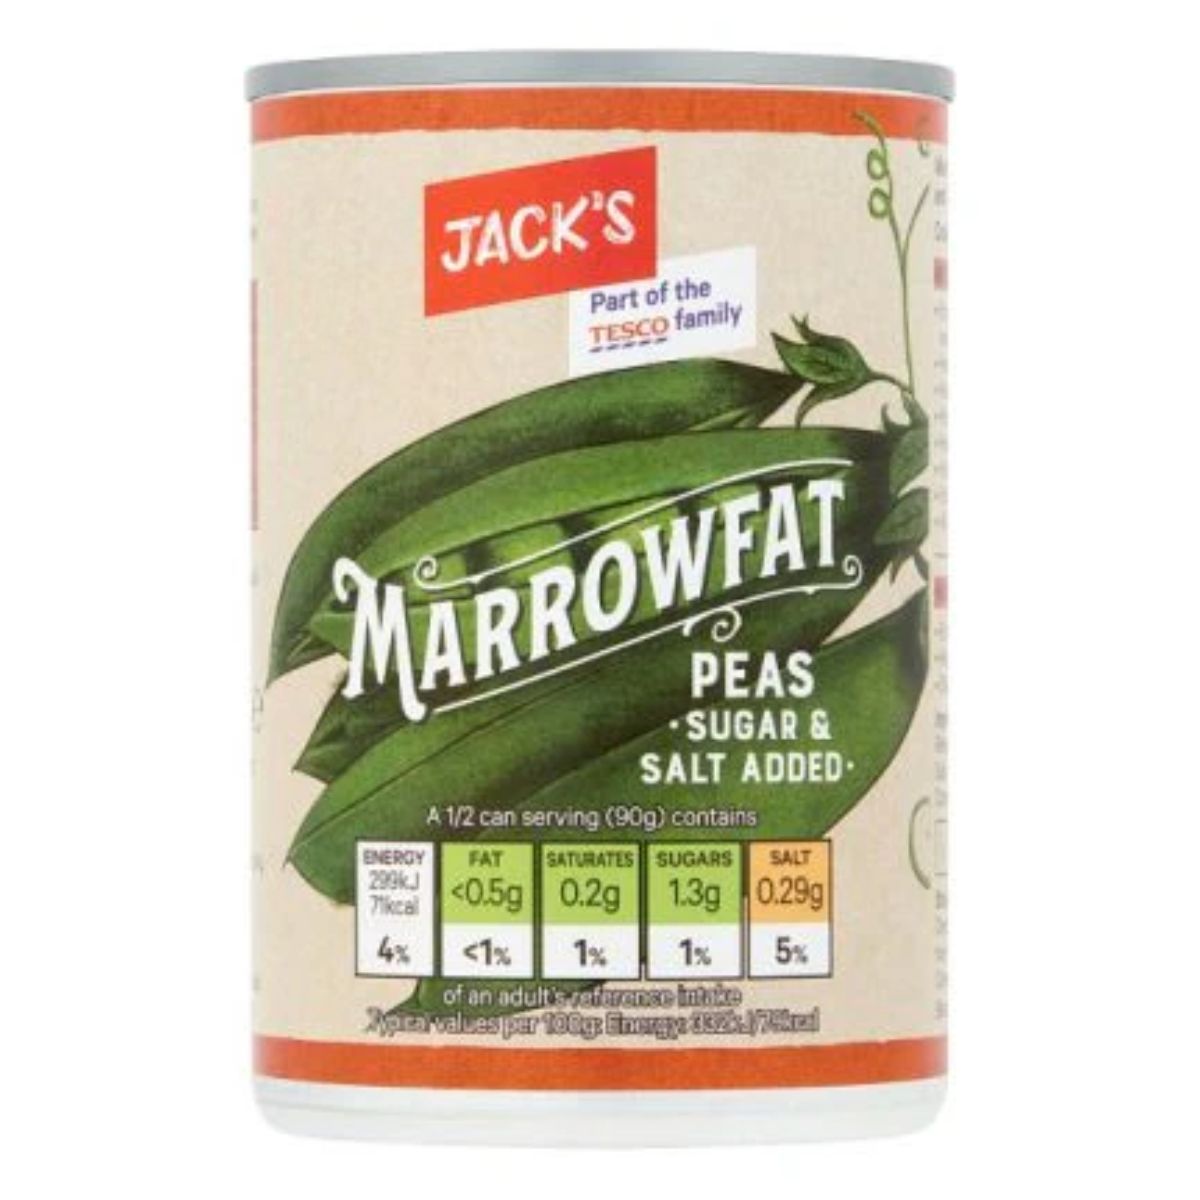 A can of Jacks Marrowfat Peas - 300g with added sugar and salt, displaying nutritional information and labeled "Part of the Tesco family.